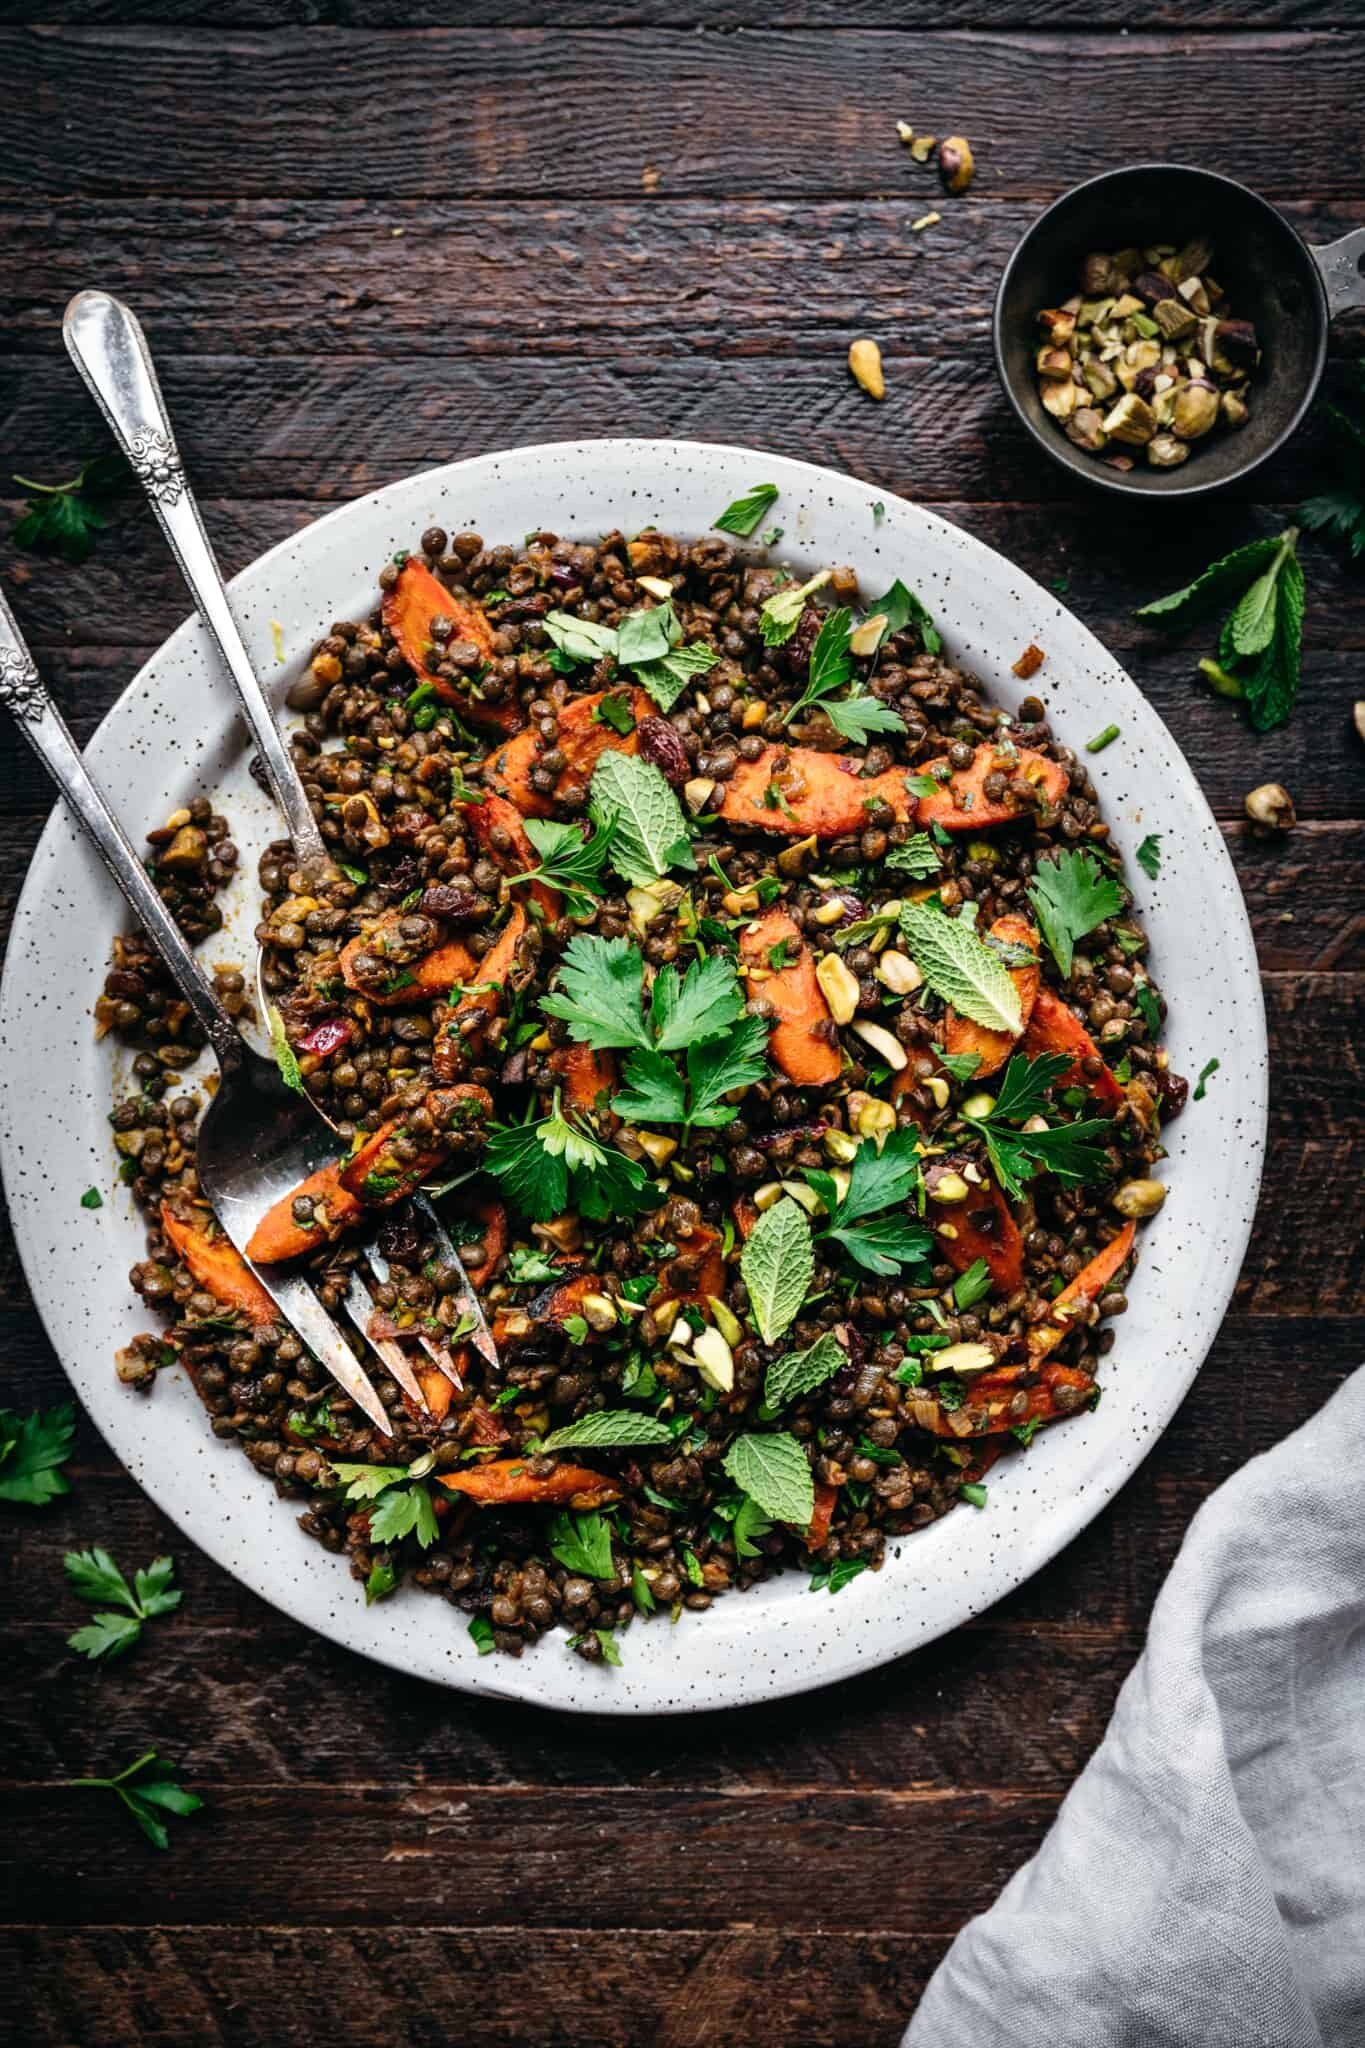 Moroccan Carrot and Lentil Salad